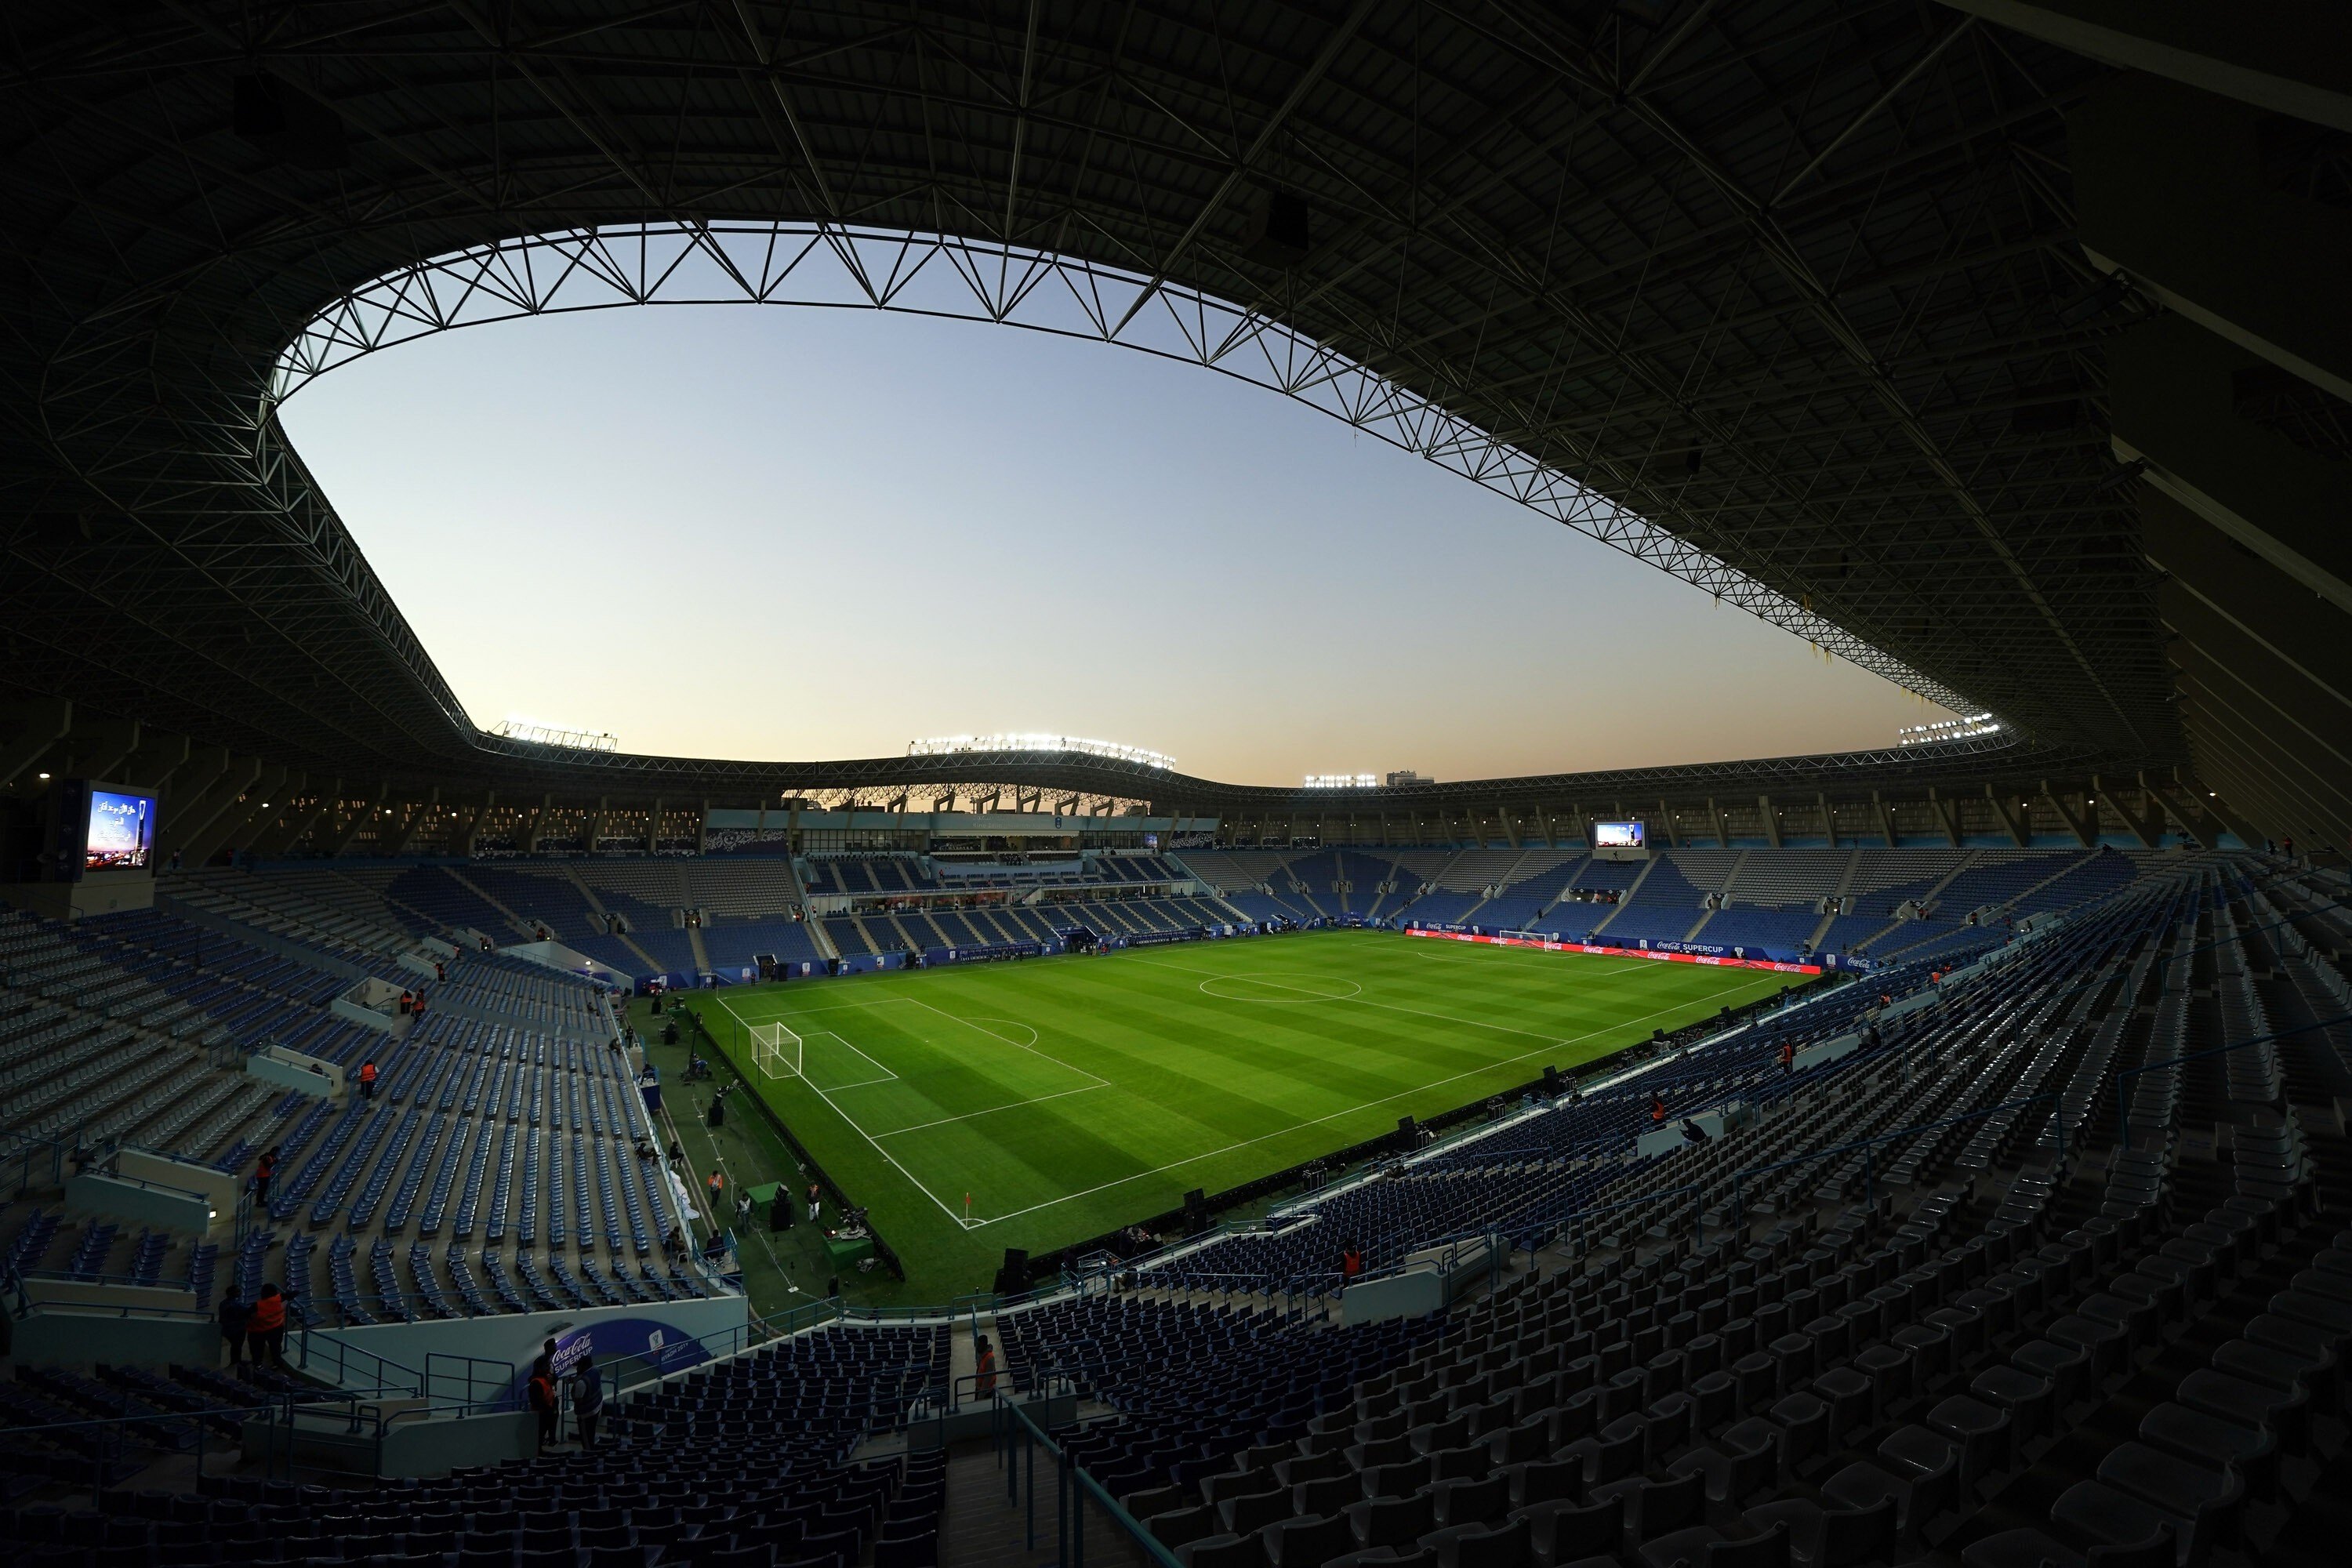 The King Saud University Stadium in Riyadh, Saudi Arabia could be set to play host to events at the 2030 Asian Games. Photo: Claudio Villa/Getty Images for Lega Serie A